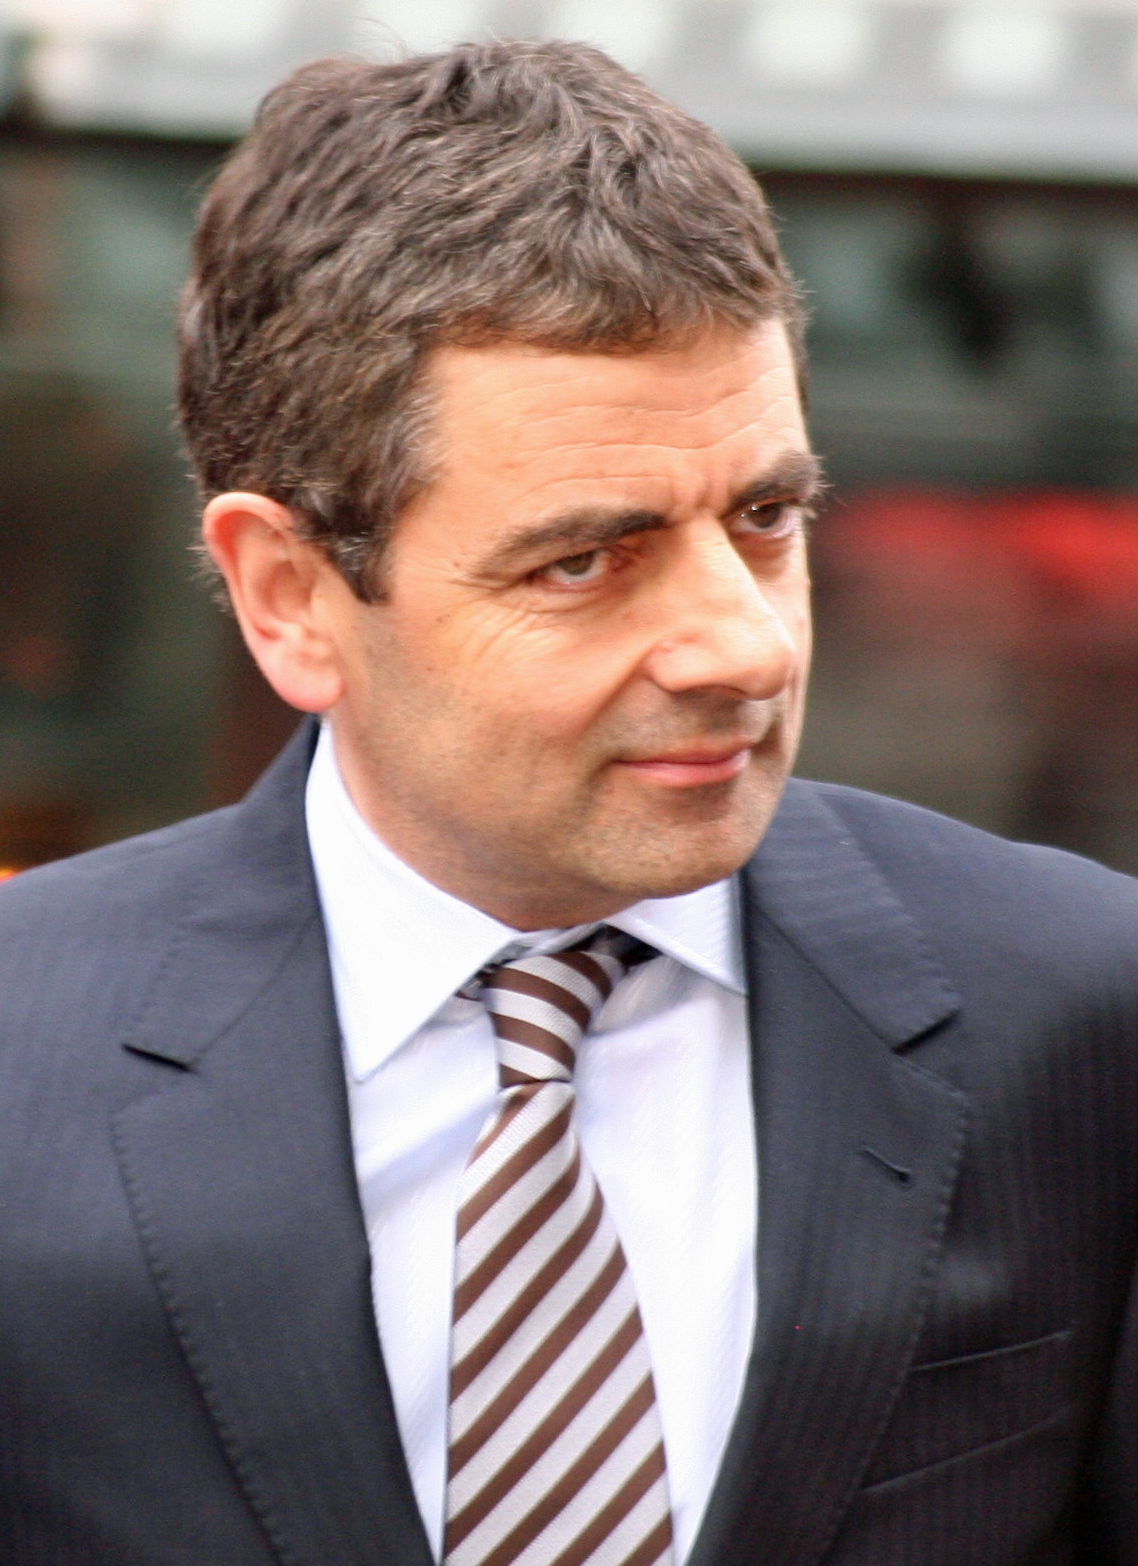 Mr Bean Wife And Children HD Wallpaper Background Image